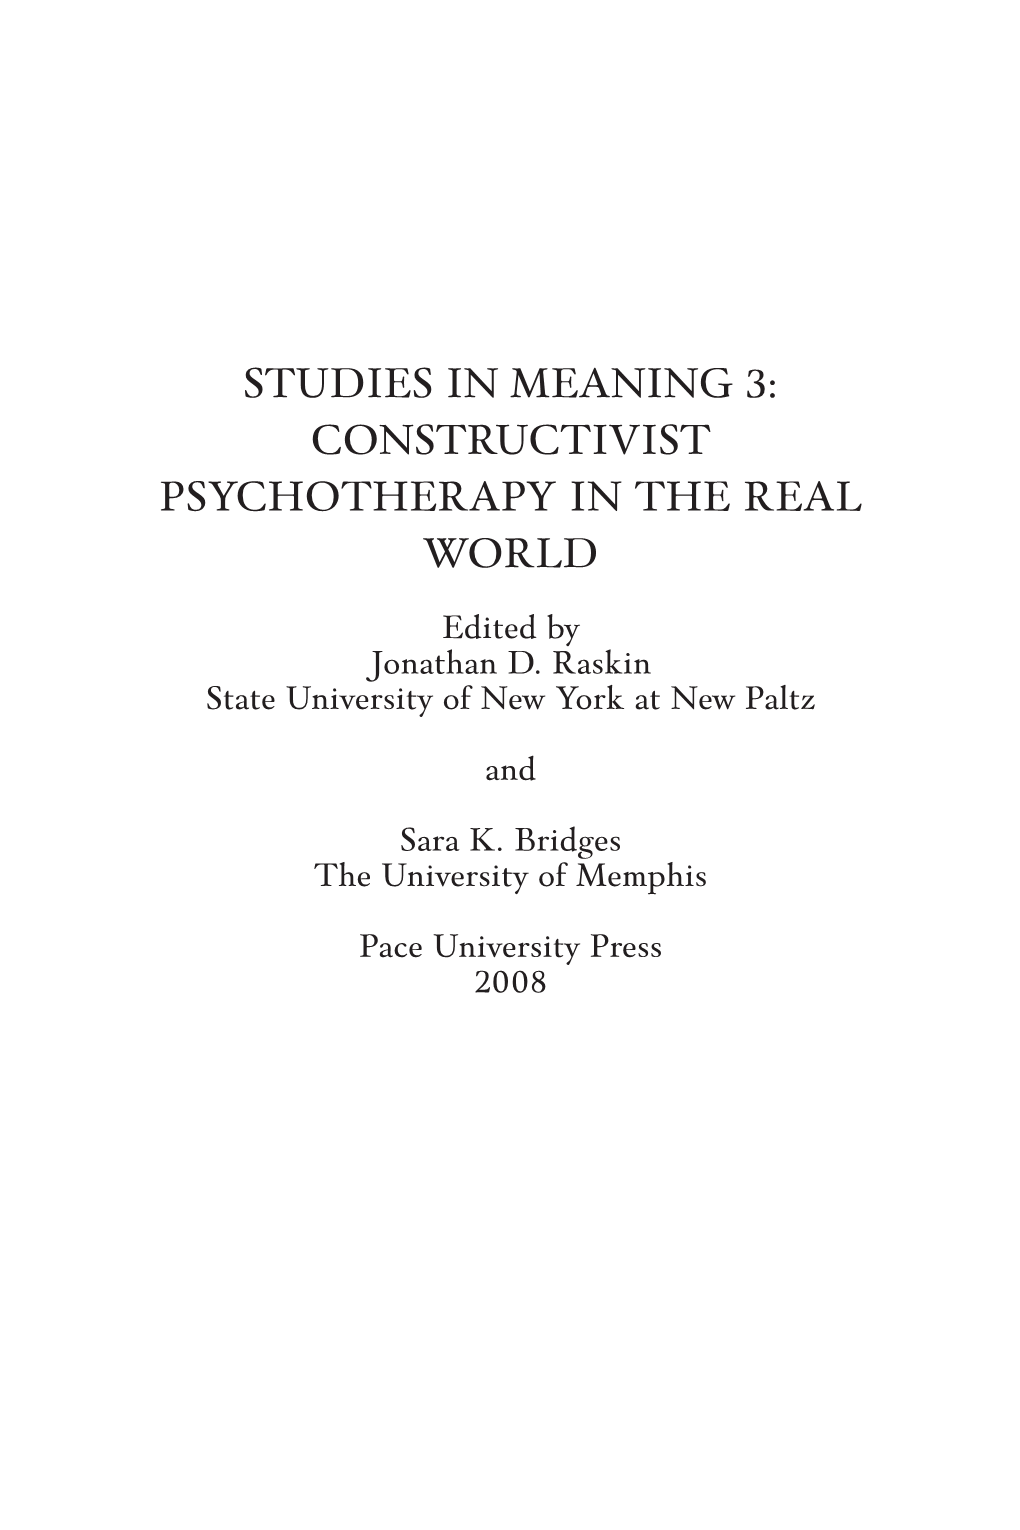 Constructivist Psychotherapy in the Real World